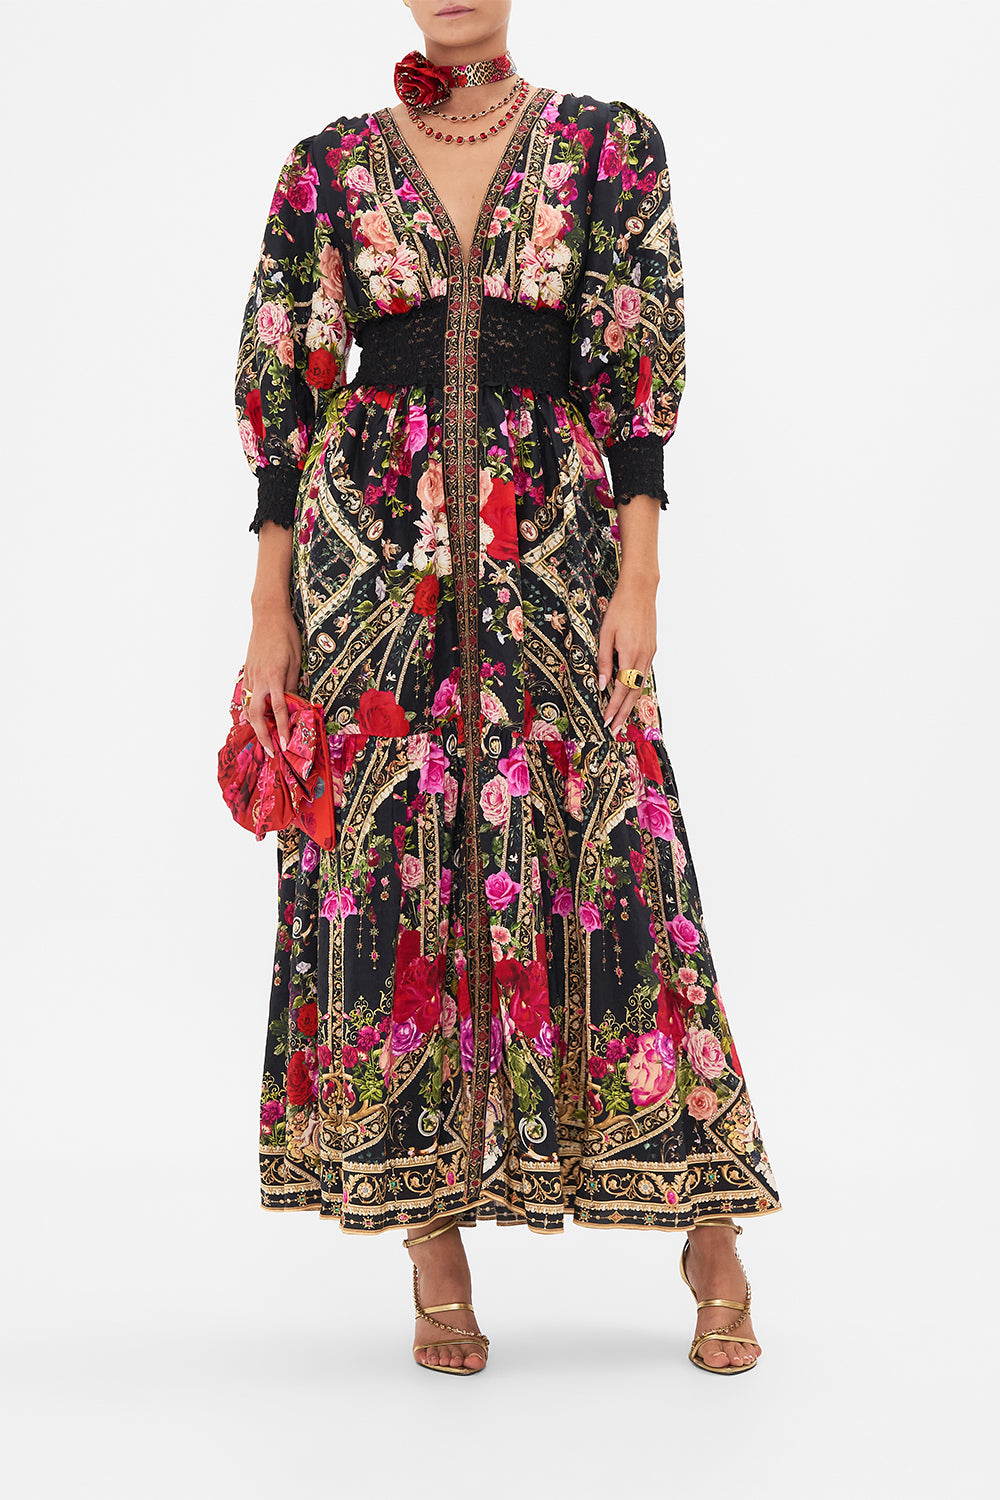 Front view of model wearing CAMILLA floral maxi dress in Reservation For Love print